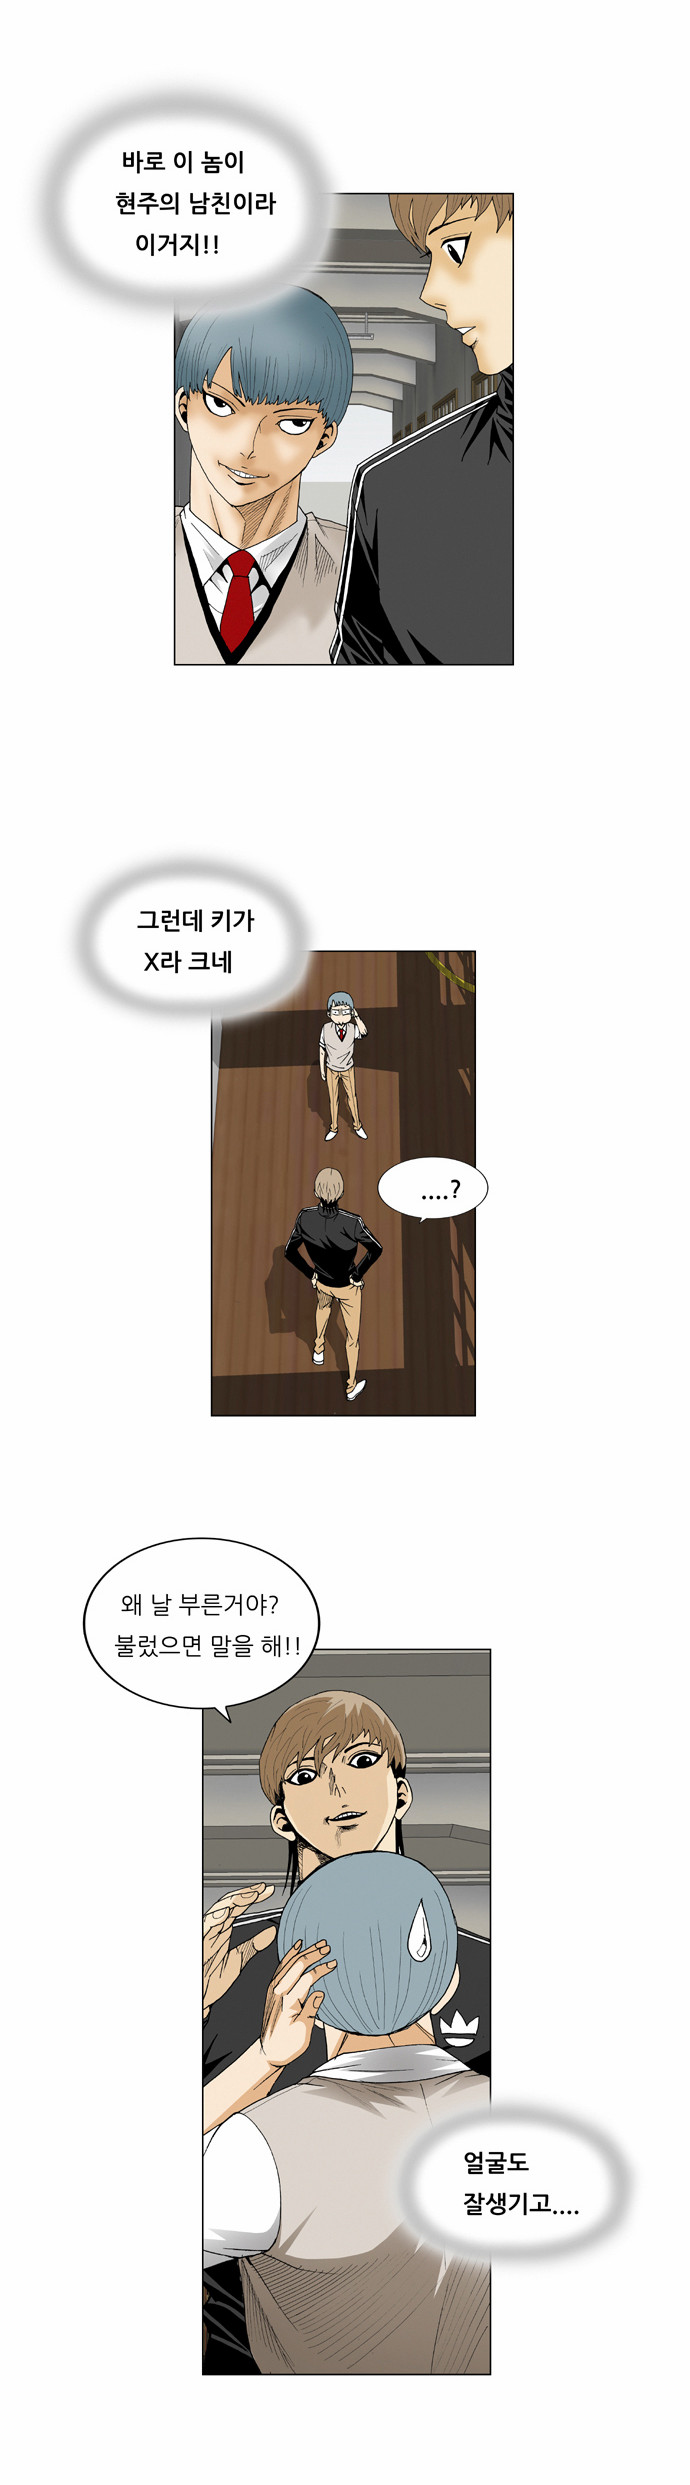 Ultimate Legend - Kang Hae Hyo - Chapter 65 - Page 3